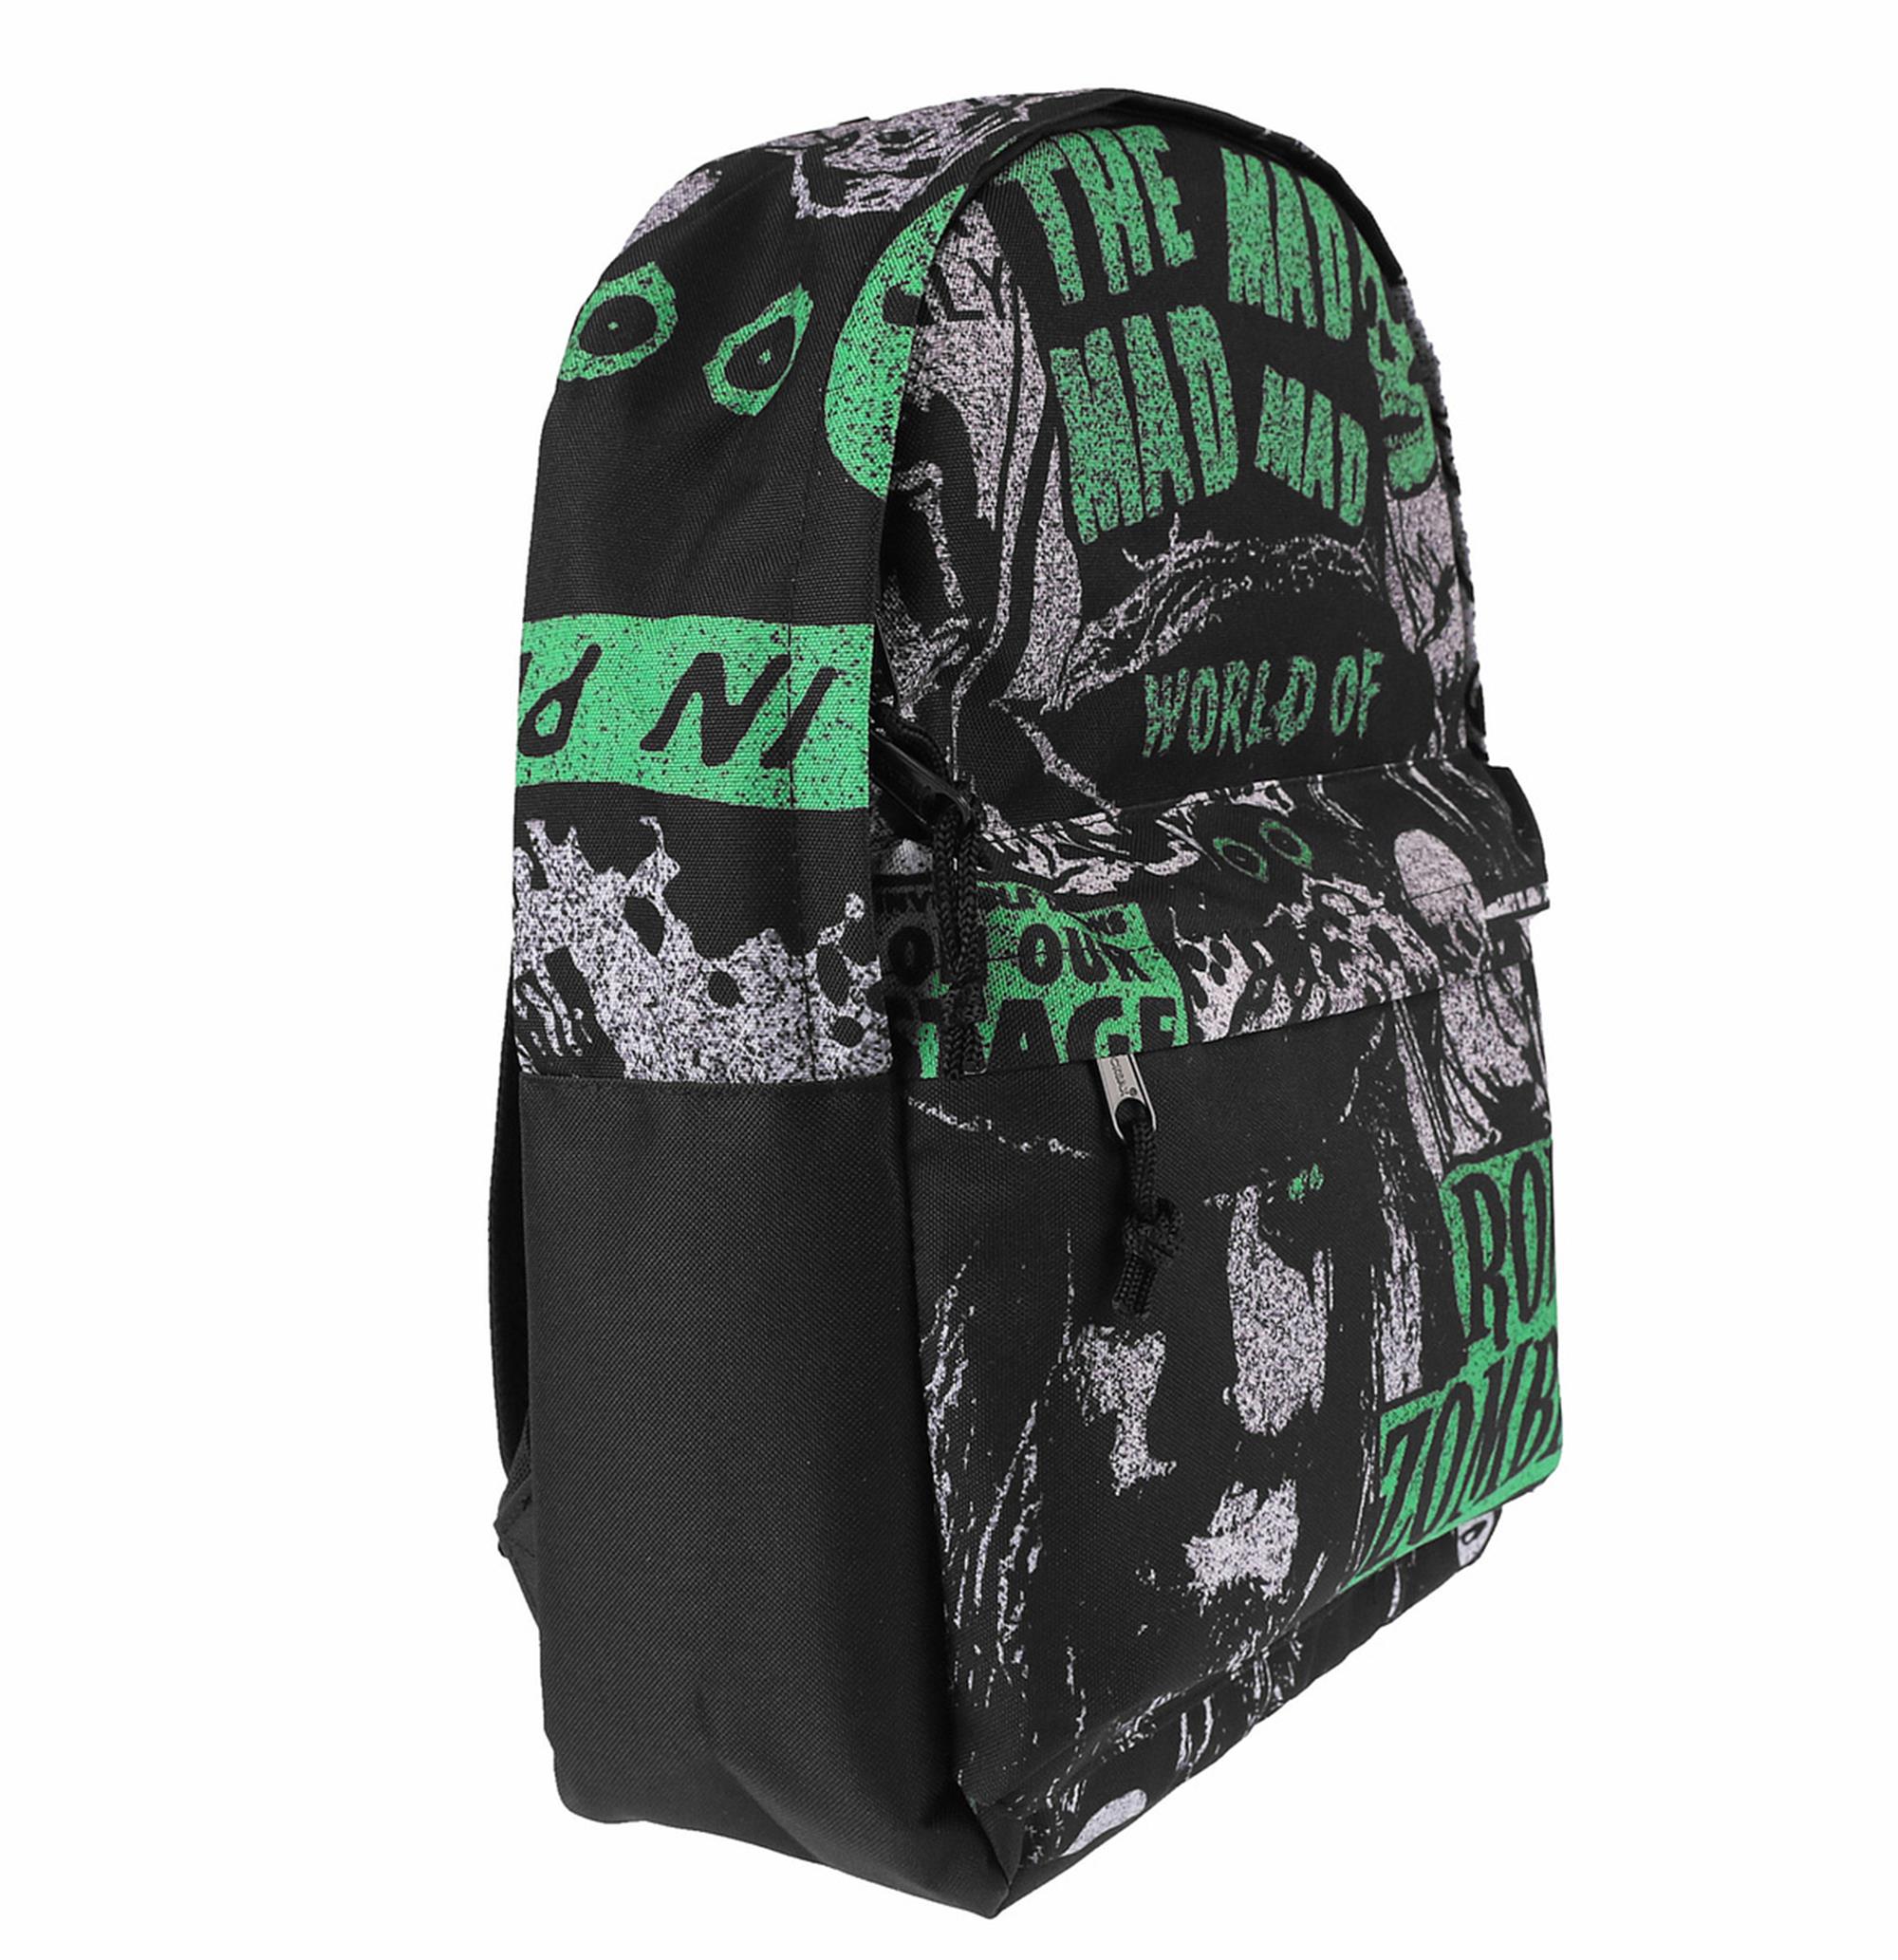 Mad Mad World Backpack